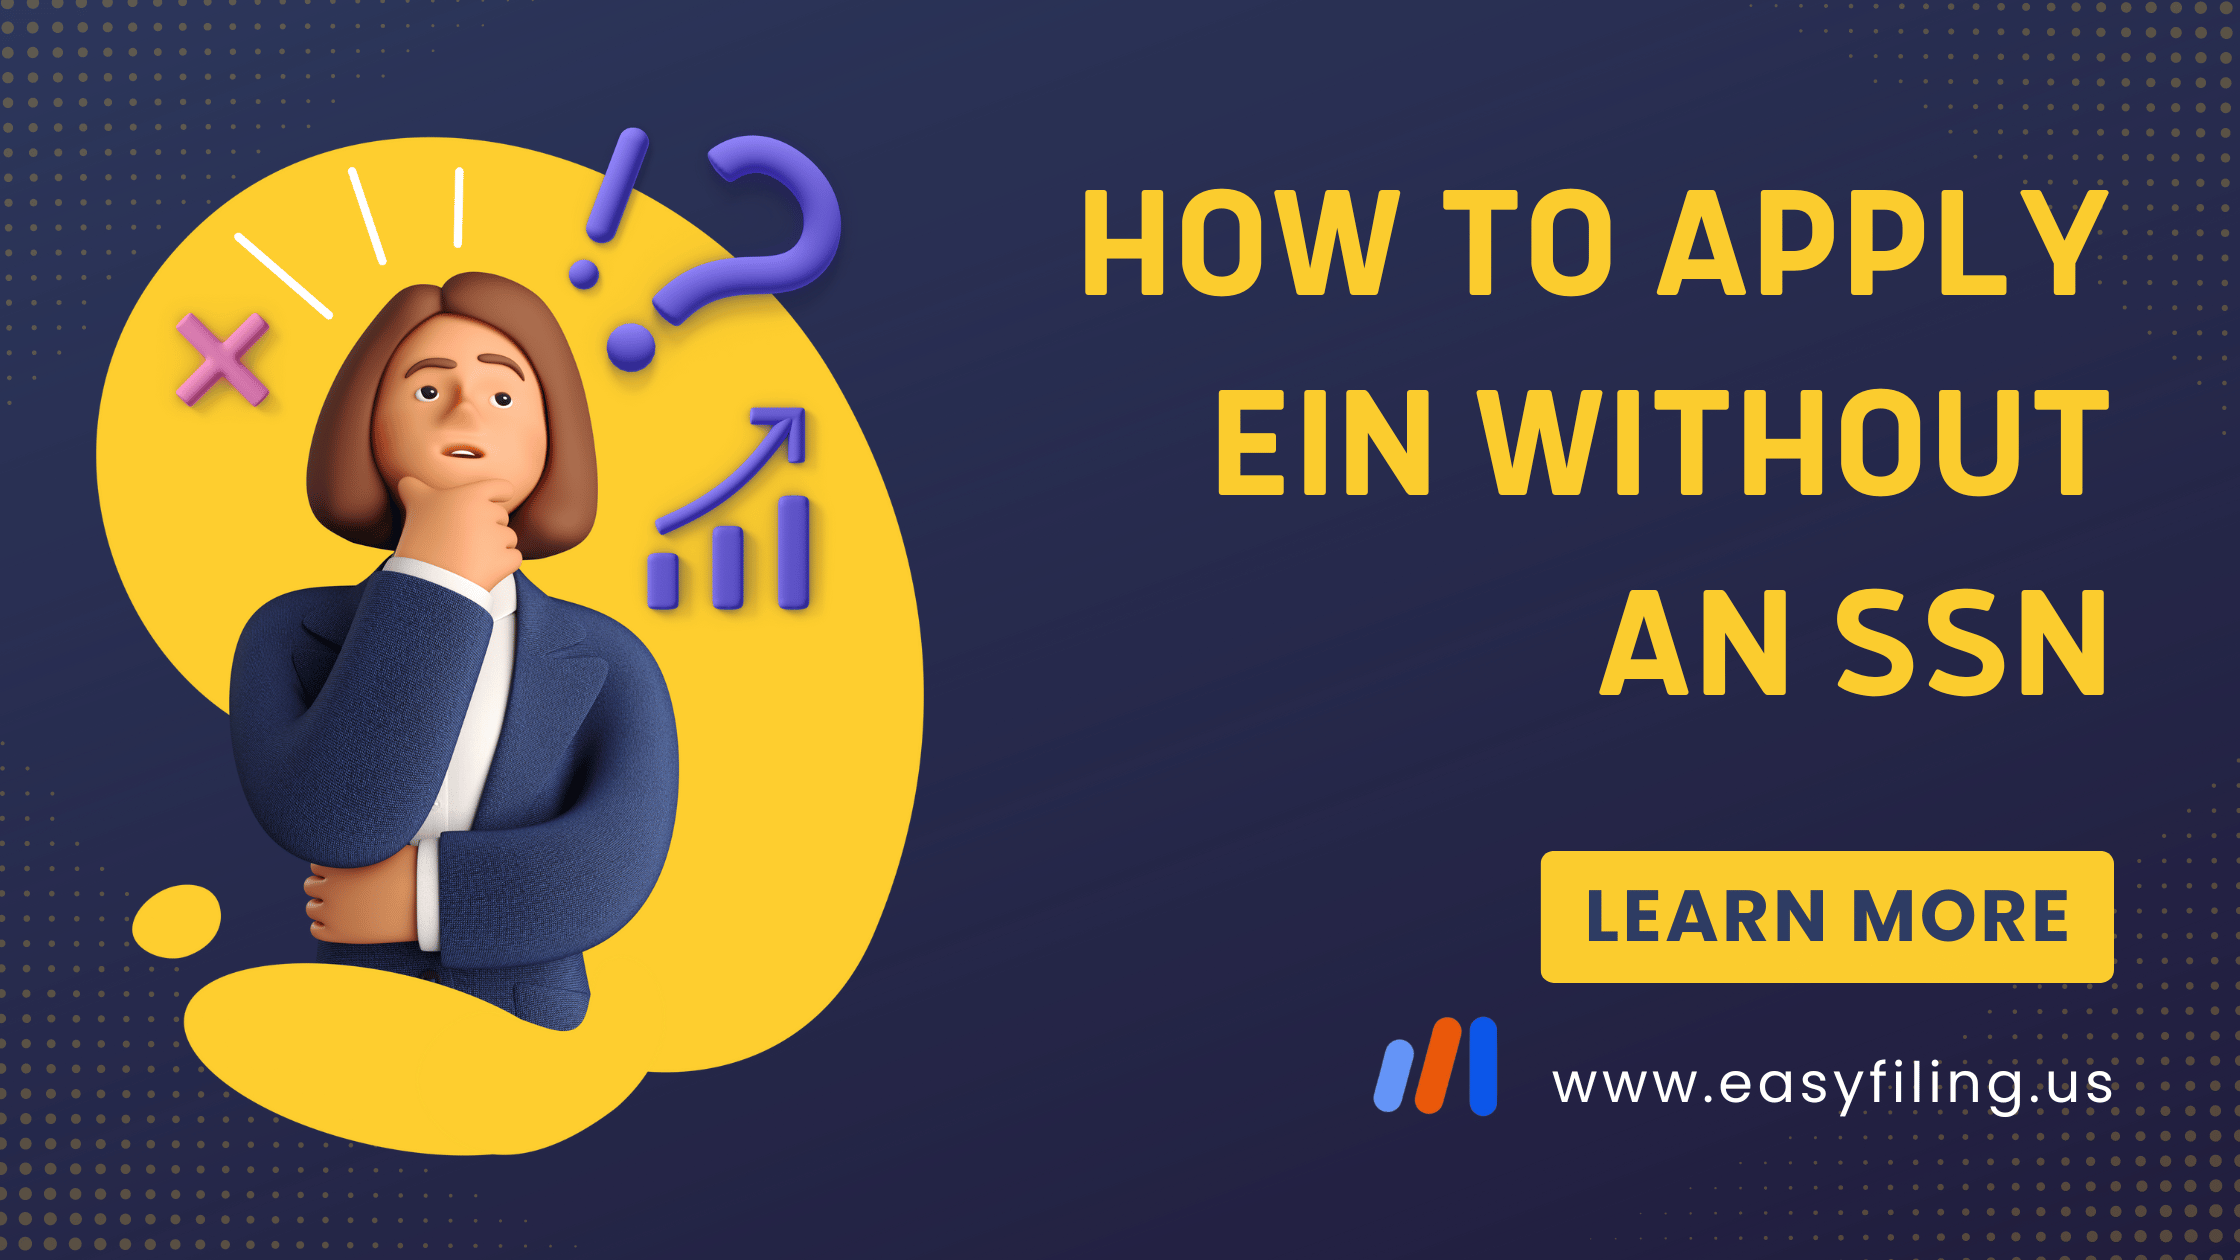 How to apply an EIN without an SSN